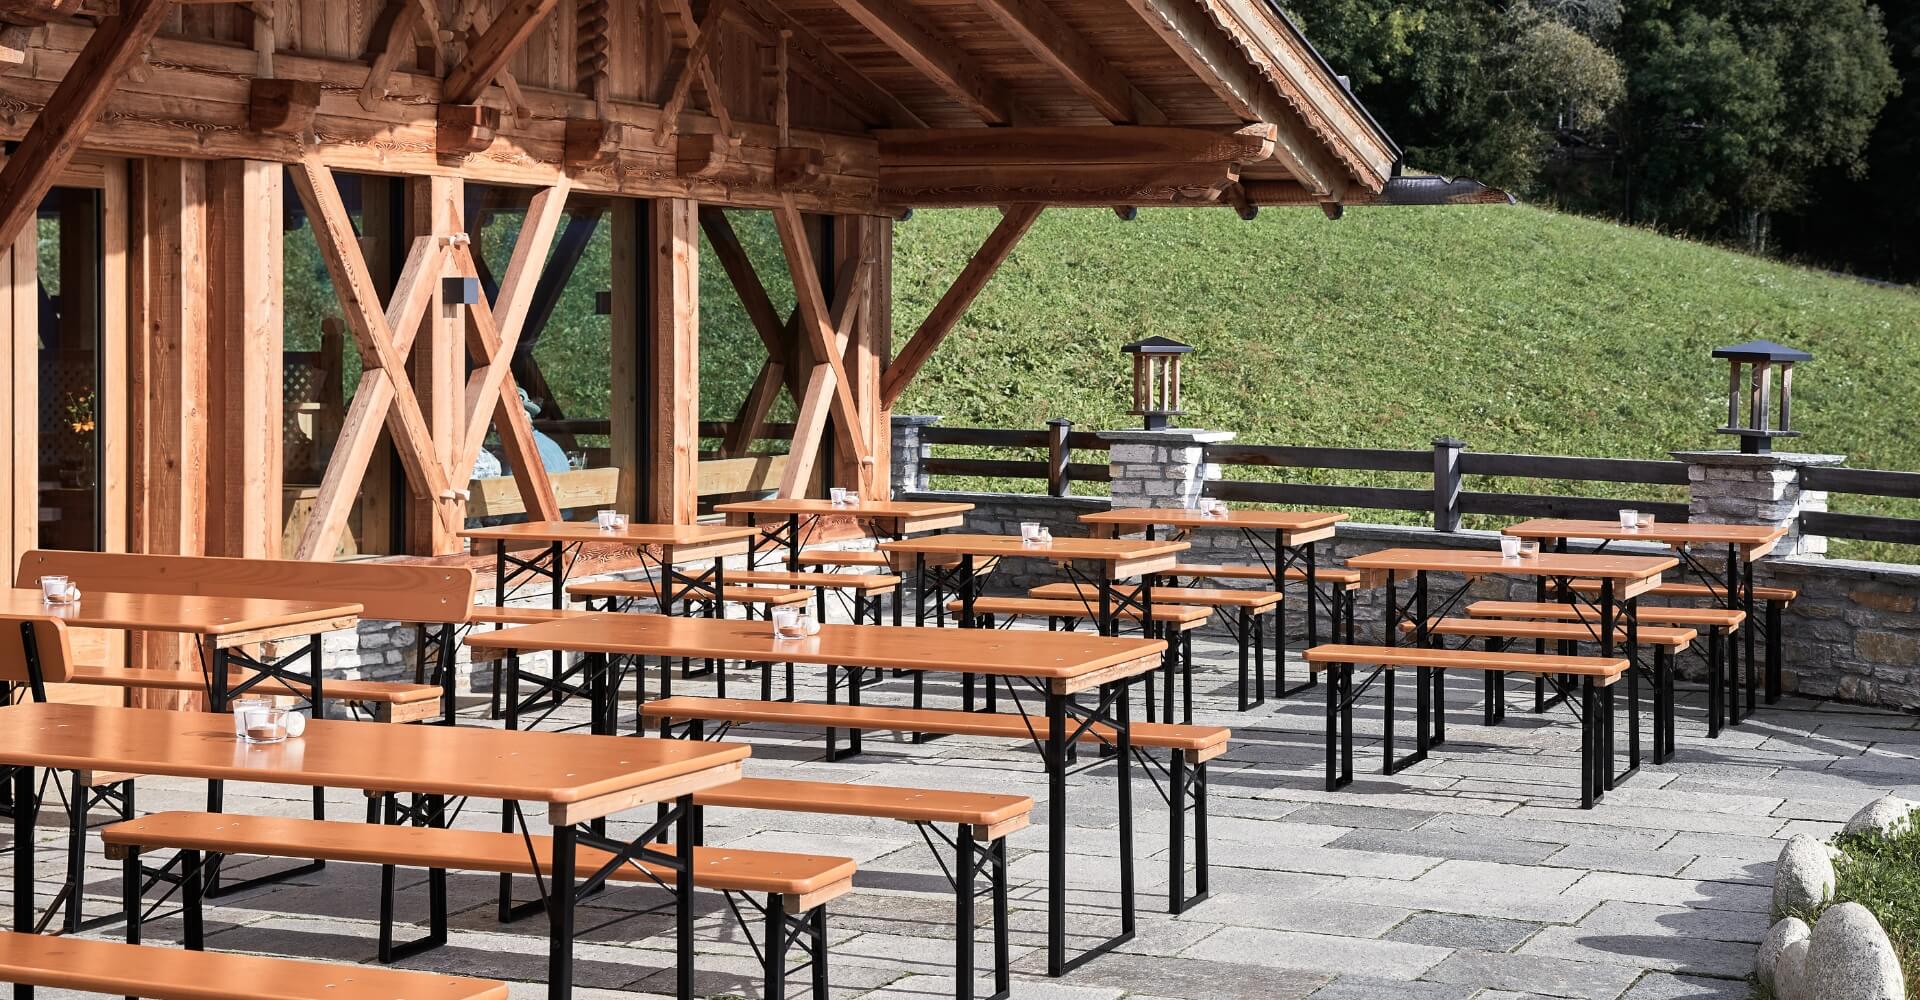 Beer garden table sets on the terrace of the cottage